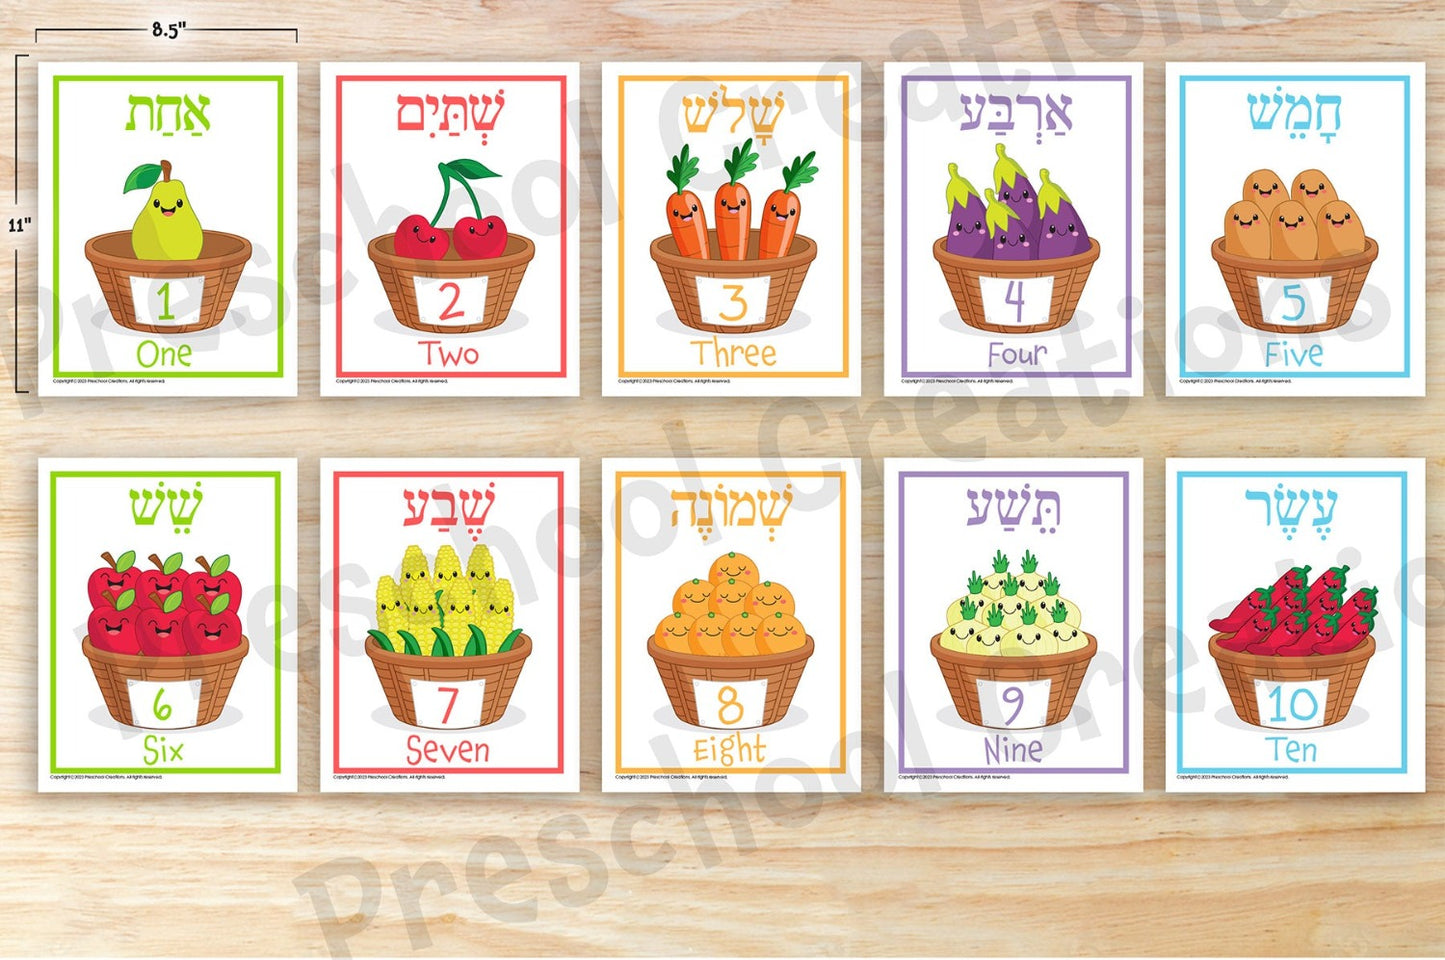 10 pages of full color posters  Help your children learn Hebrew numbers in a fun and engaging way with our Counting 1-10 posters in Hebrew!  With 10 full-color posters featuring numbers 1-10 in vivid Hebrew, accompanied by captivating illustrations, your children will learn counting quickly and easily.  What are you waiting for? Start your children on the path of learning Hebrew numbers today